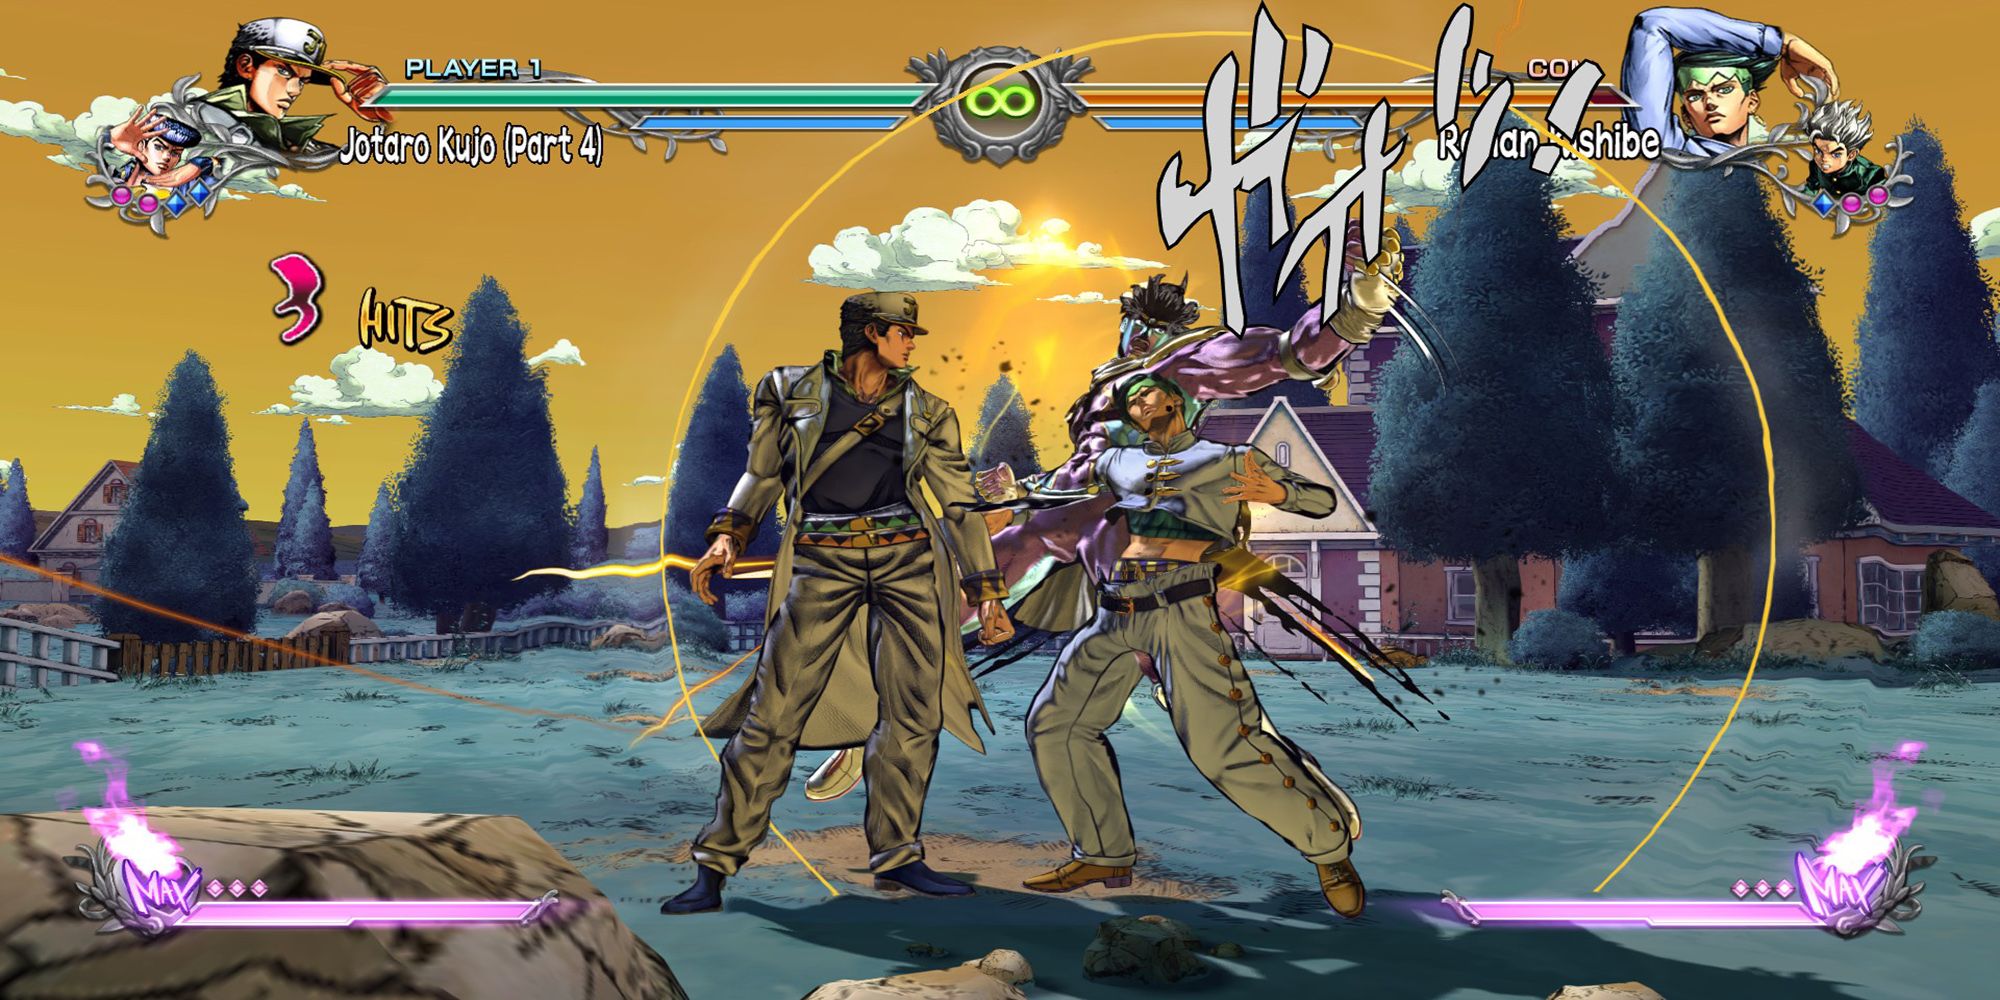 Jotaro Kujo uses Quick Stand ON to switch in Star Platinum while fighting Rohan Kishibe at Cape Boingy-Boing in Jojo's Bizarre Adventure ASBR.